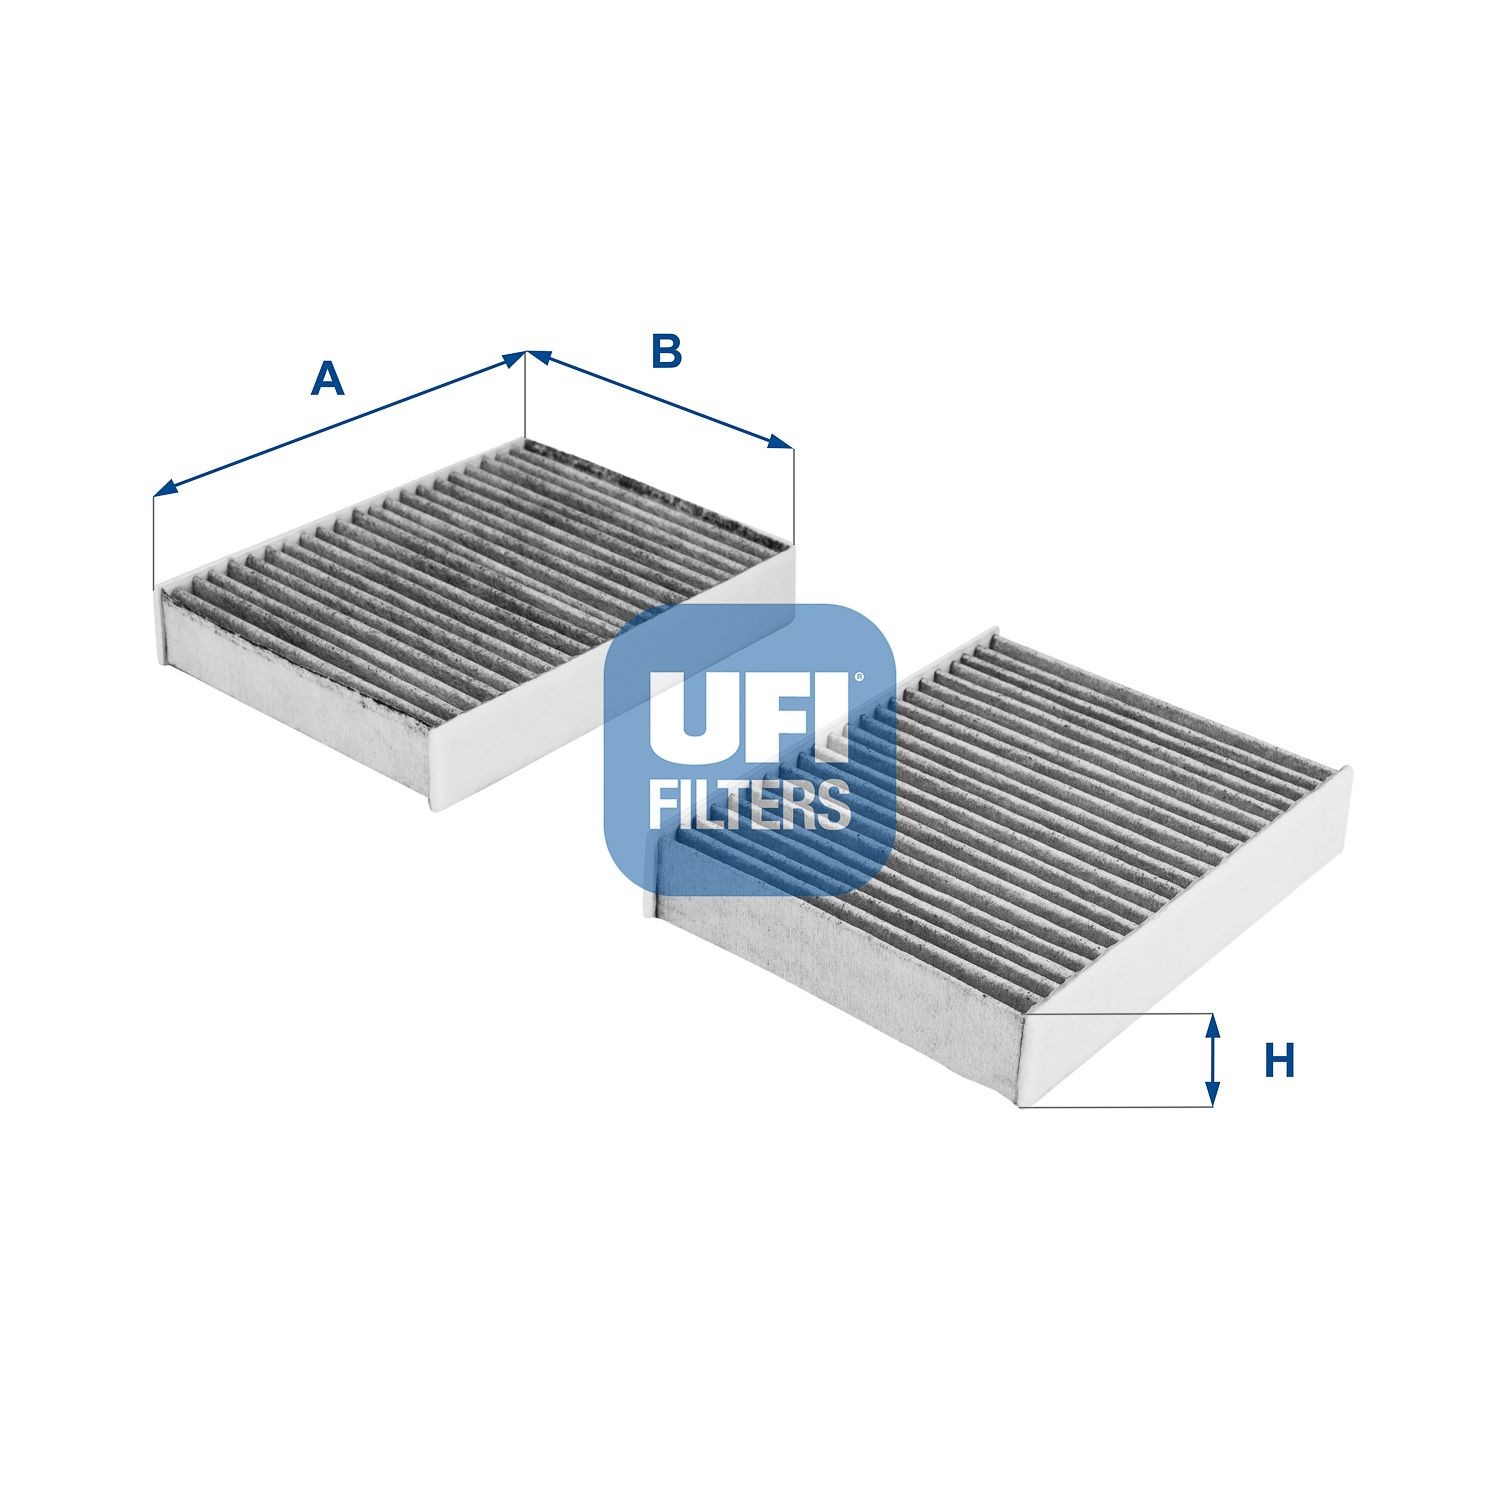 54.104.00 Air con filter 54.104.00 UFI Activated Carbon Filter, 175 mm x 139 mm x 30 mm